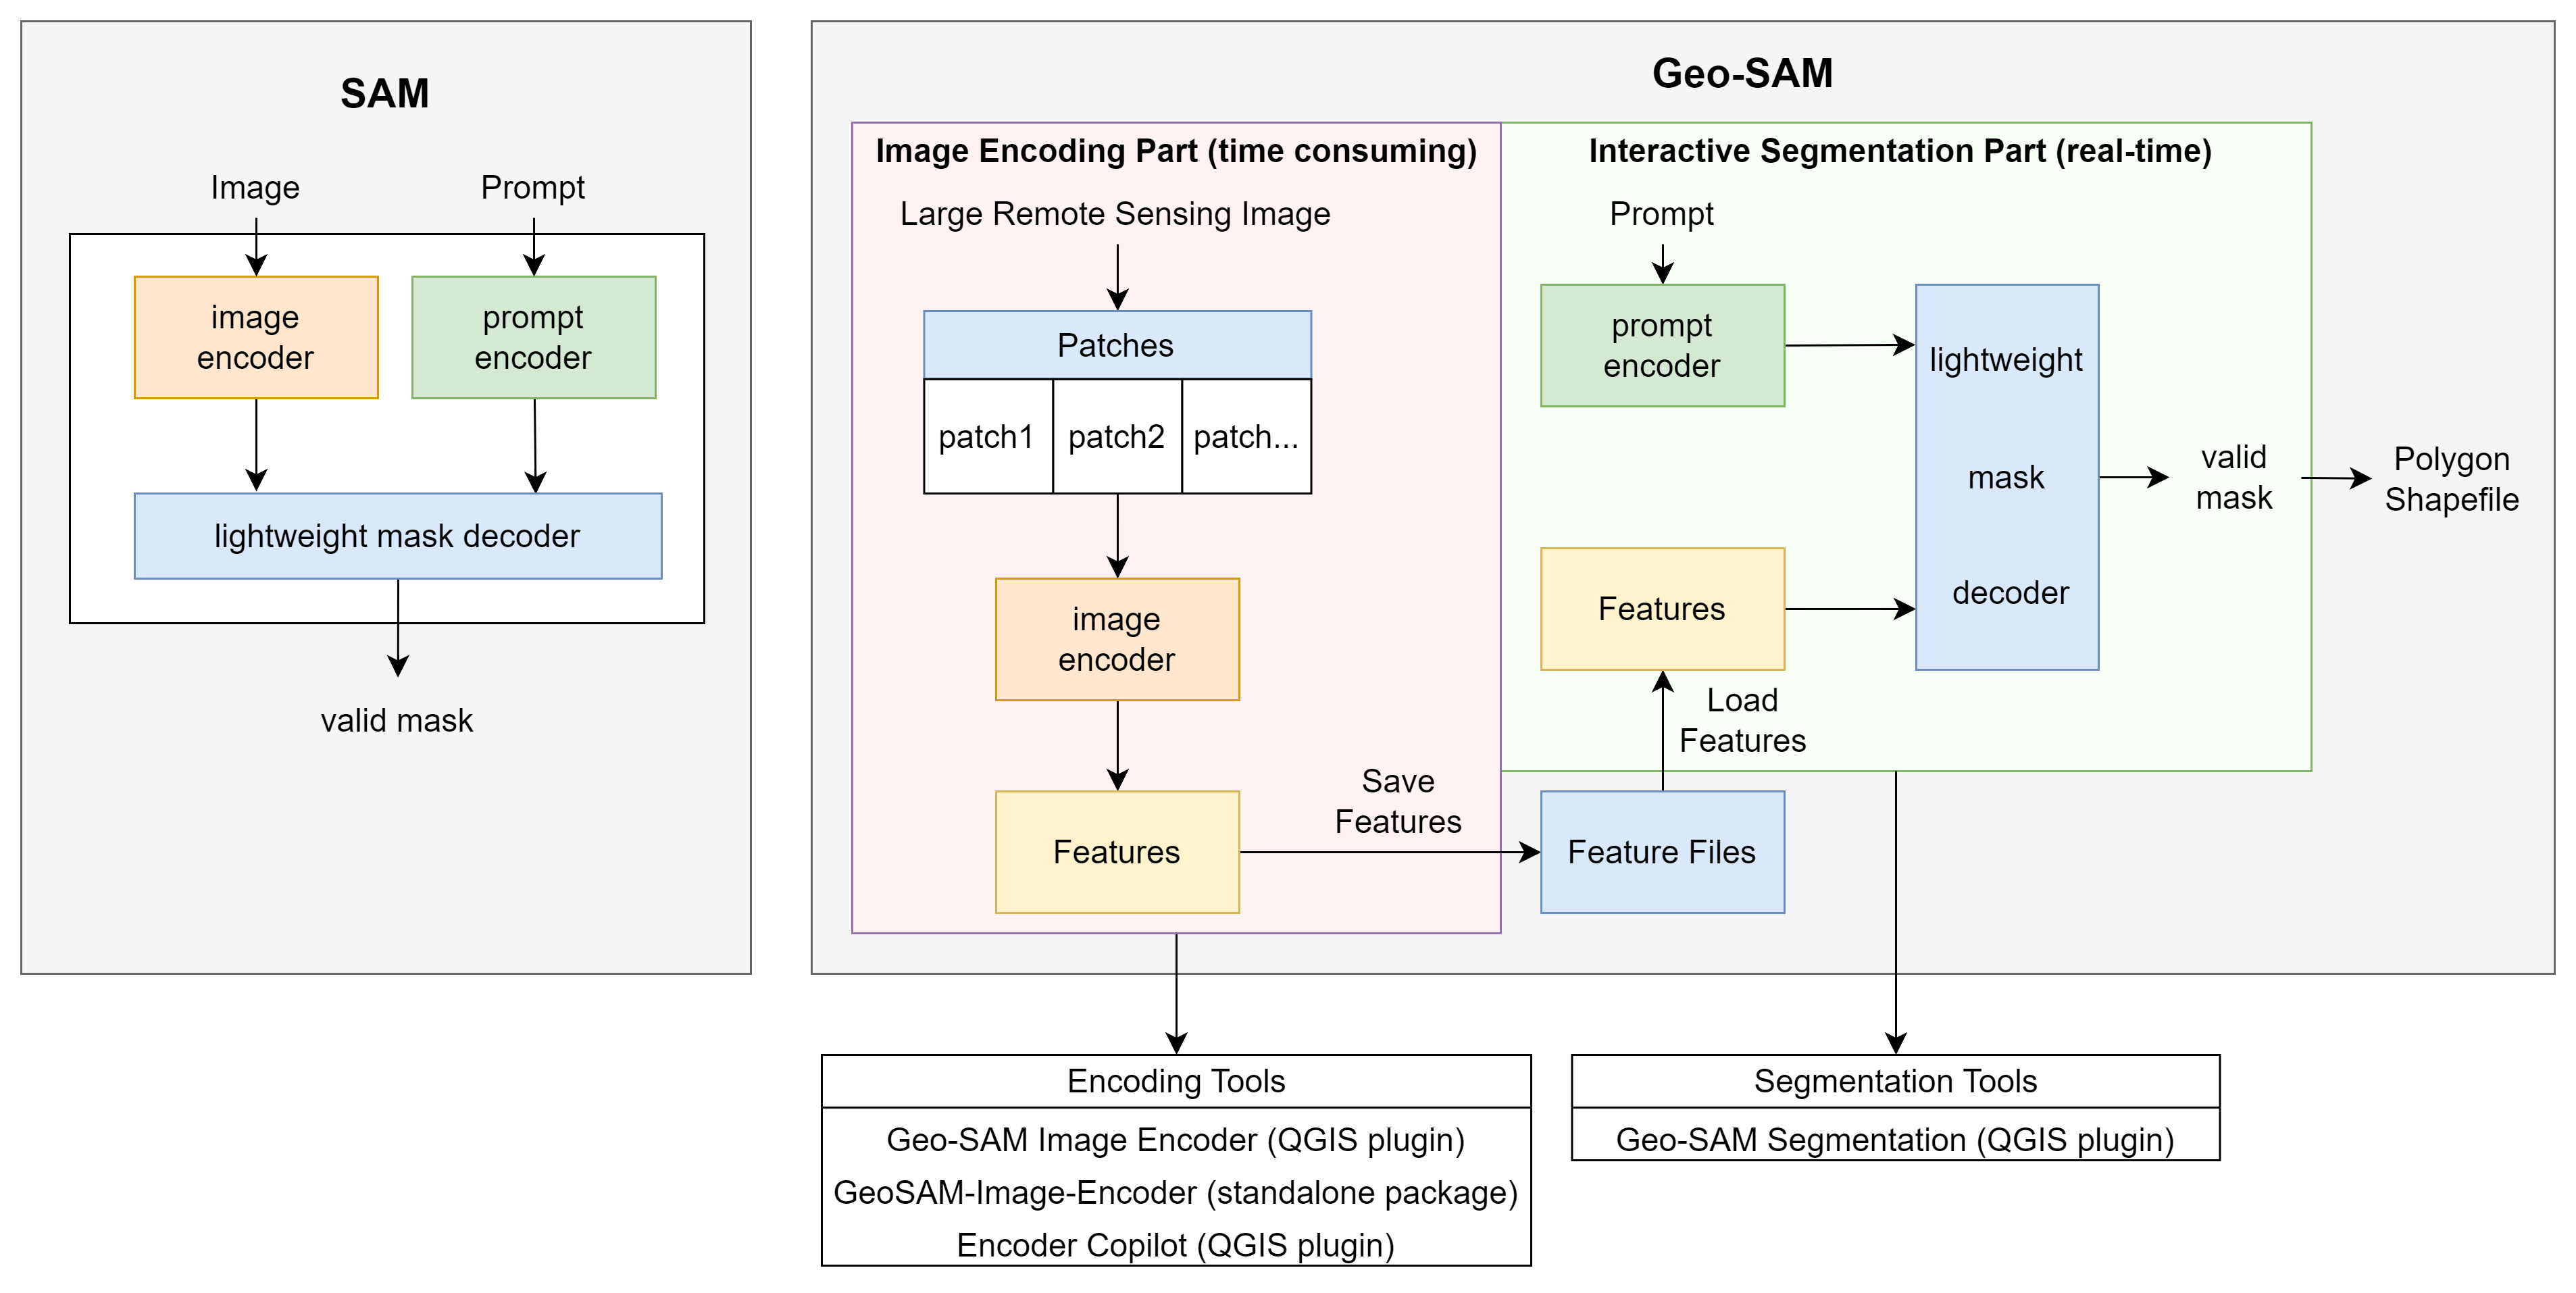 Comparison of the workflow between Geo-SAM and the original SAM